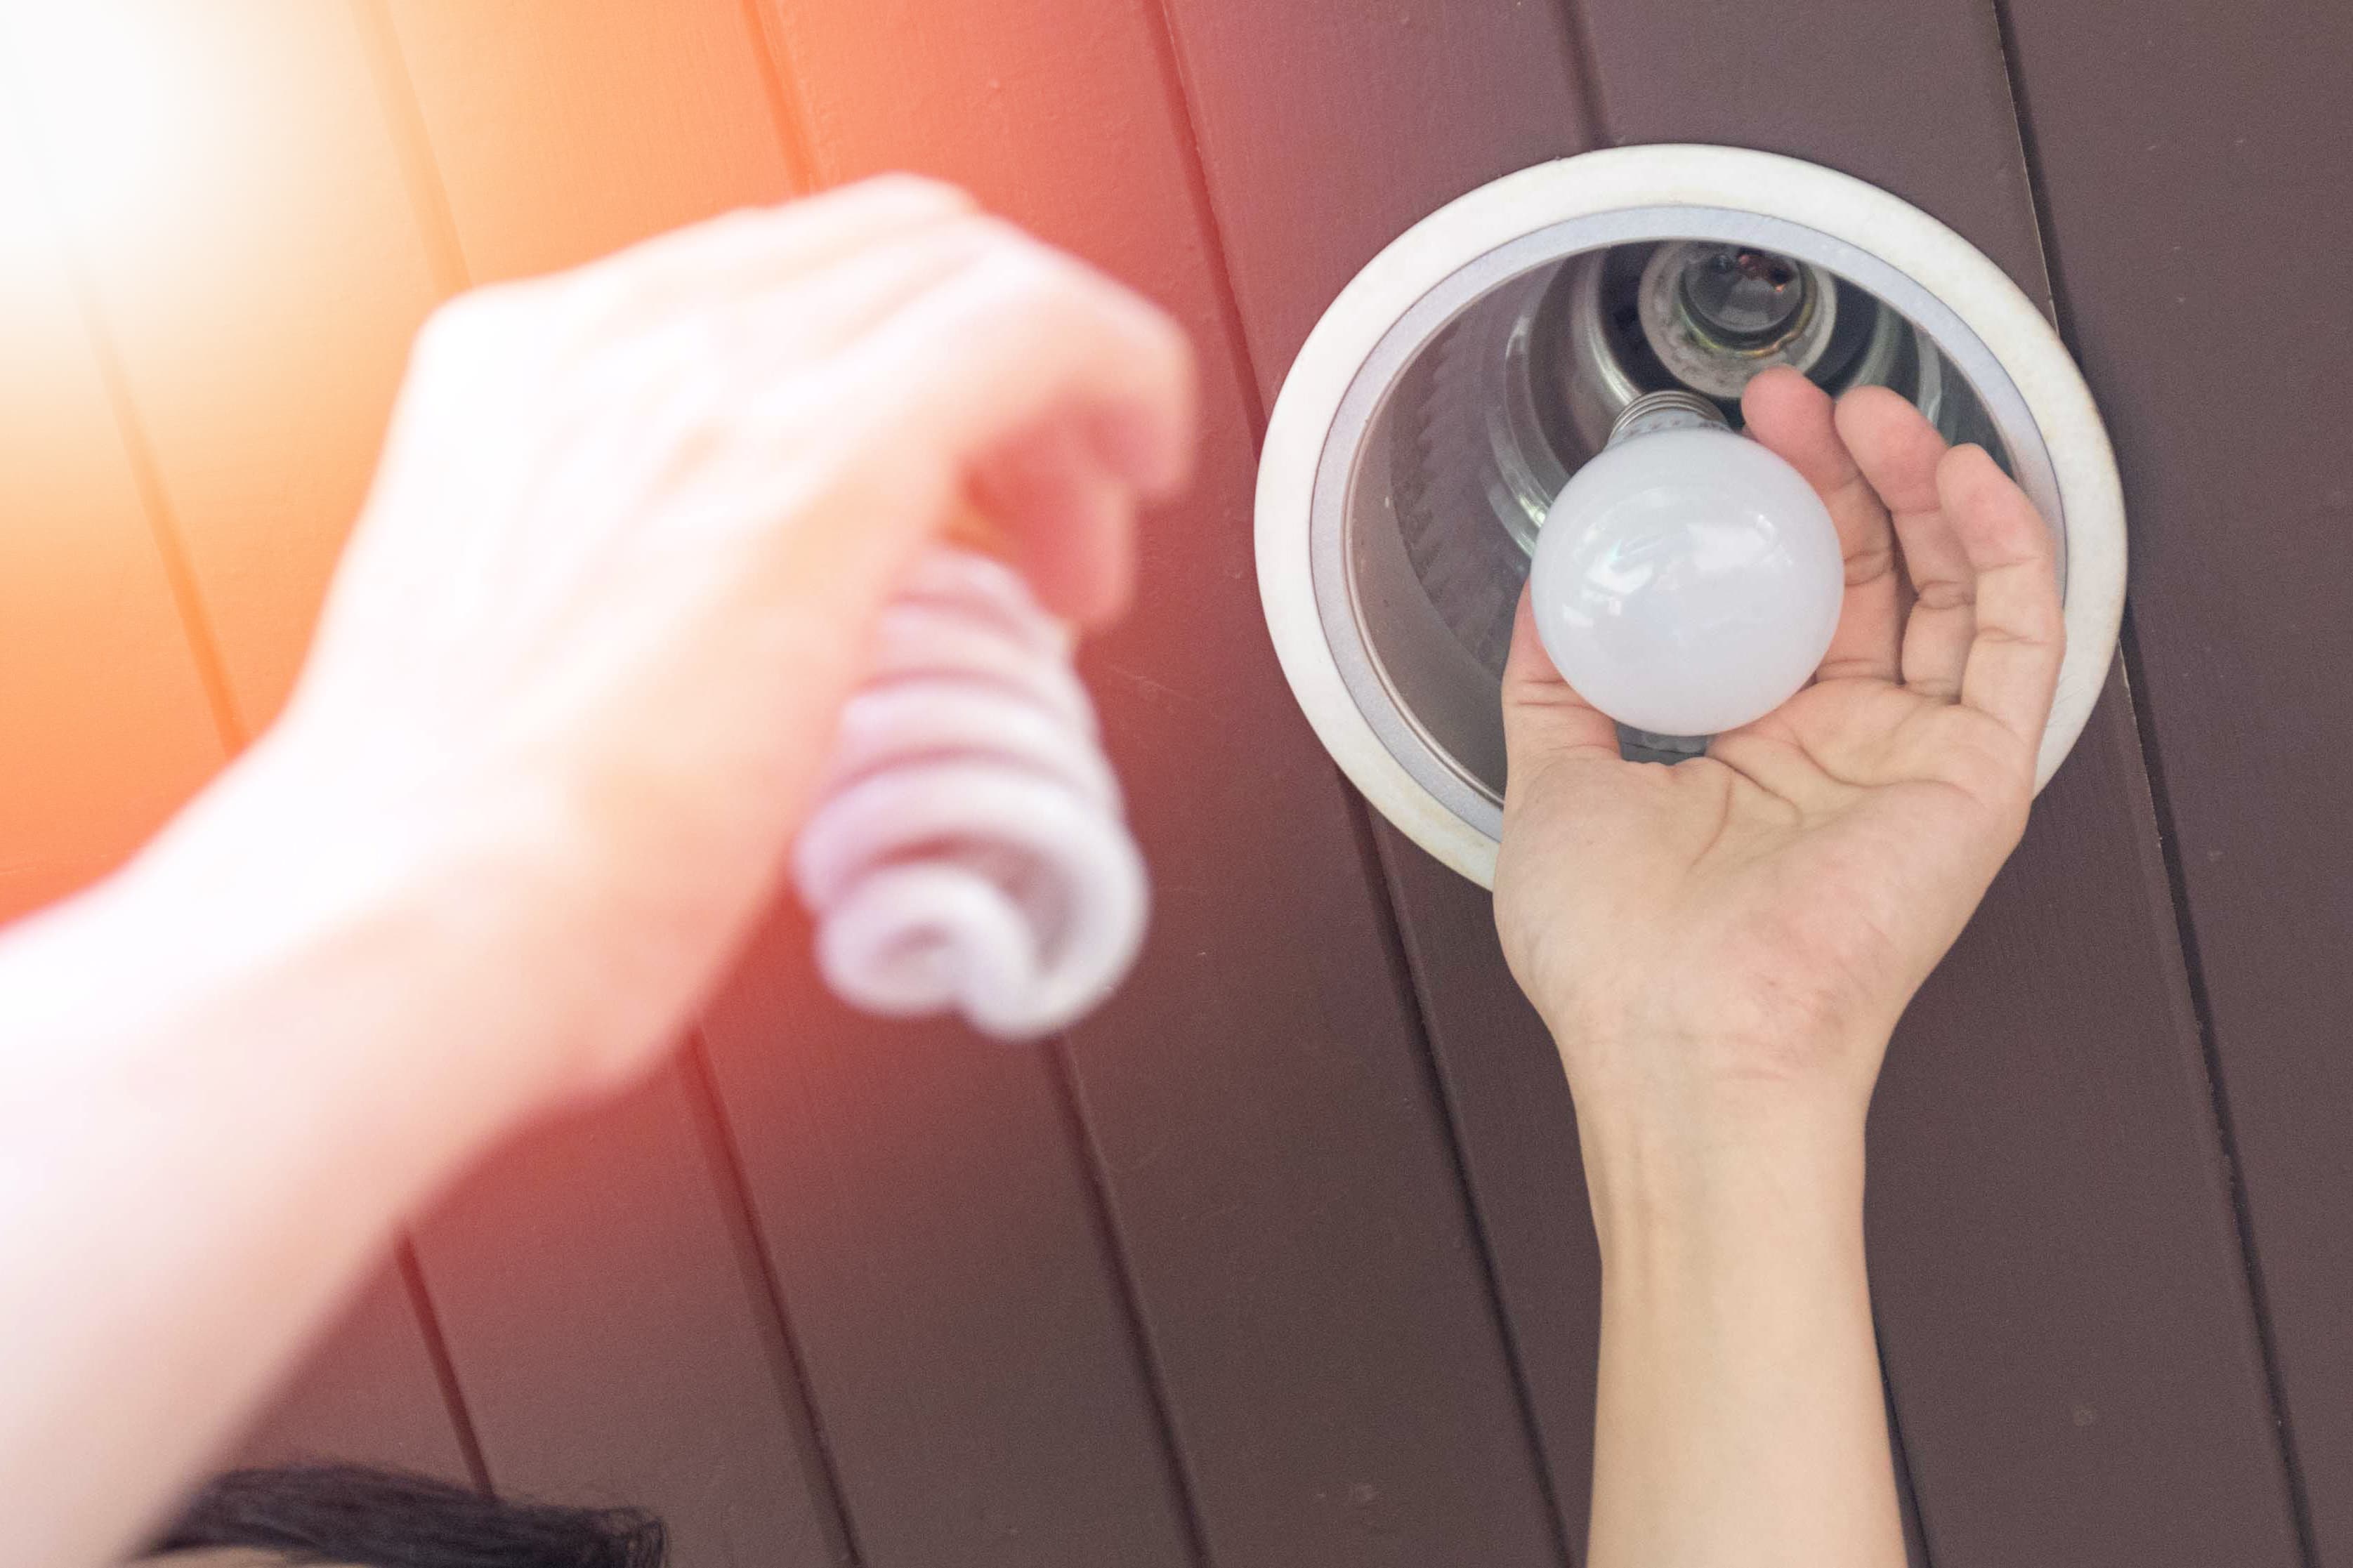 Have You Broken a CFL Bulb? If You Have Then You May Be at Risk